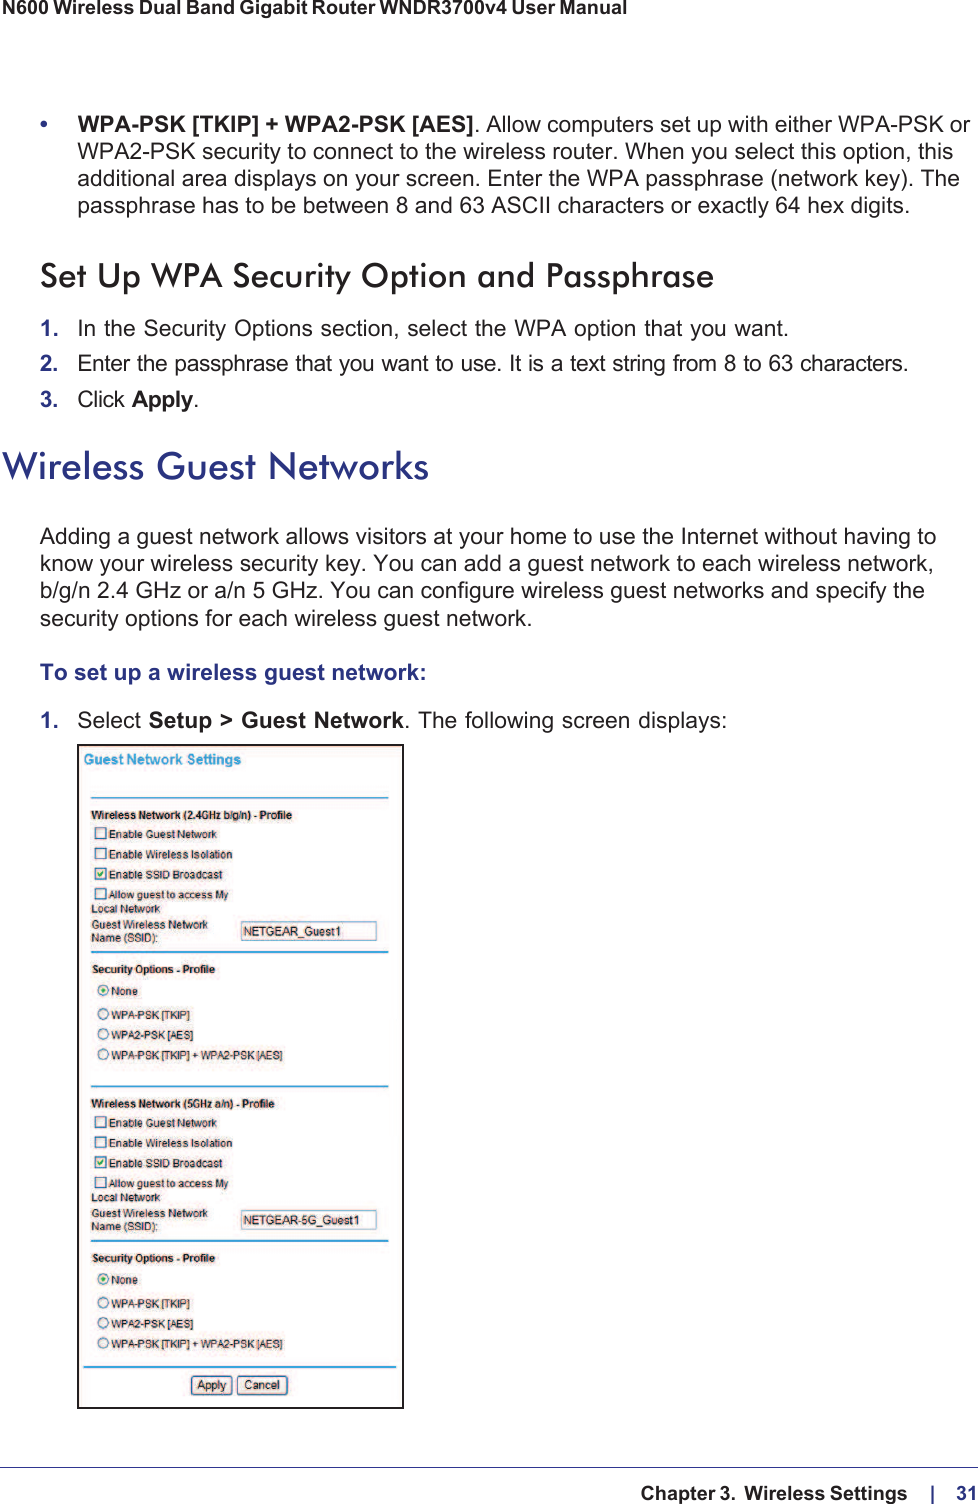   Chapter 3.  Wireless Settings     |    31N600 Wireless Dual Band Gigabit Router WNDR3700v4 User Manual •WPA-PSK [TKIP] + WPA2-PSK [AES]. Allow computers set up with either WPA-PSK or WPA2-PSK security to connect to the wireless router. When you select this option, this additional area displays on your screen. Enter the WPA passphrase (network key). The passphrase has to be between 8 and 63 ASCII characters or exactly 64 hex digits.Set Up WPA Security Option and Passphrase1. In the Security Options section, select the WPA option that you want.2. Enter the passphrase that you want to use. It is a text string from 8 to 63 characters.3. Click Apply.Wireless Guest NetworksAdding a guest network allows visitors at your home to use the Internet without having to know your wireless security key. You can add a guest network to each wireless network, b/g/n 2.4 GHz or a/n 5 GHz. You can configure wireless guest networks and specify the security options for each wireless guest network. To set up a wireless guest network:1. Select Setup &gt; Guest Network. The following screen displays: